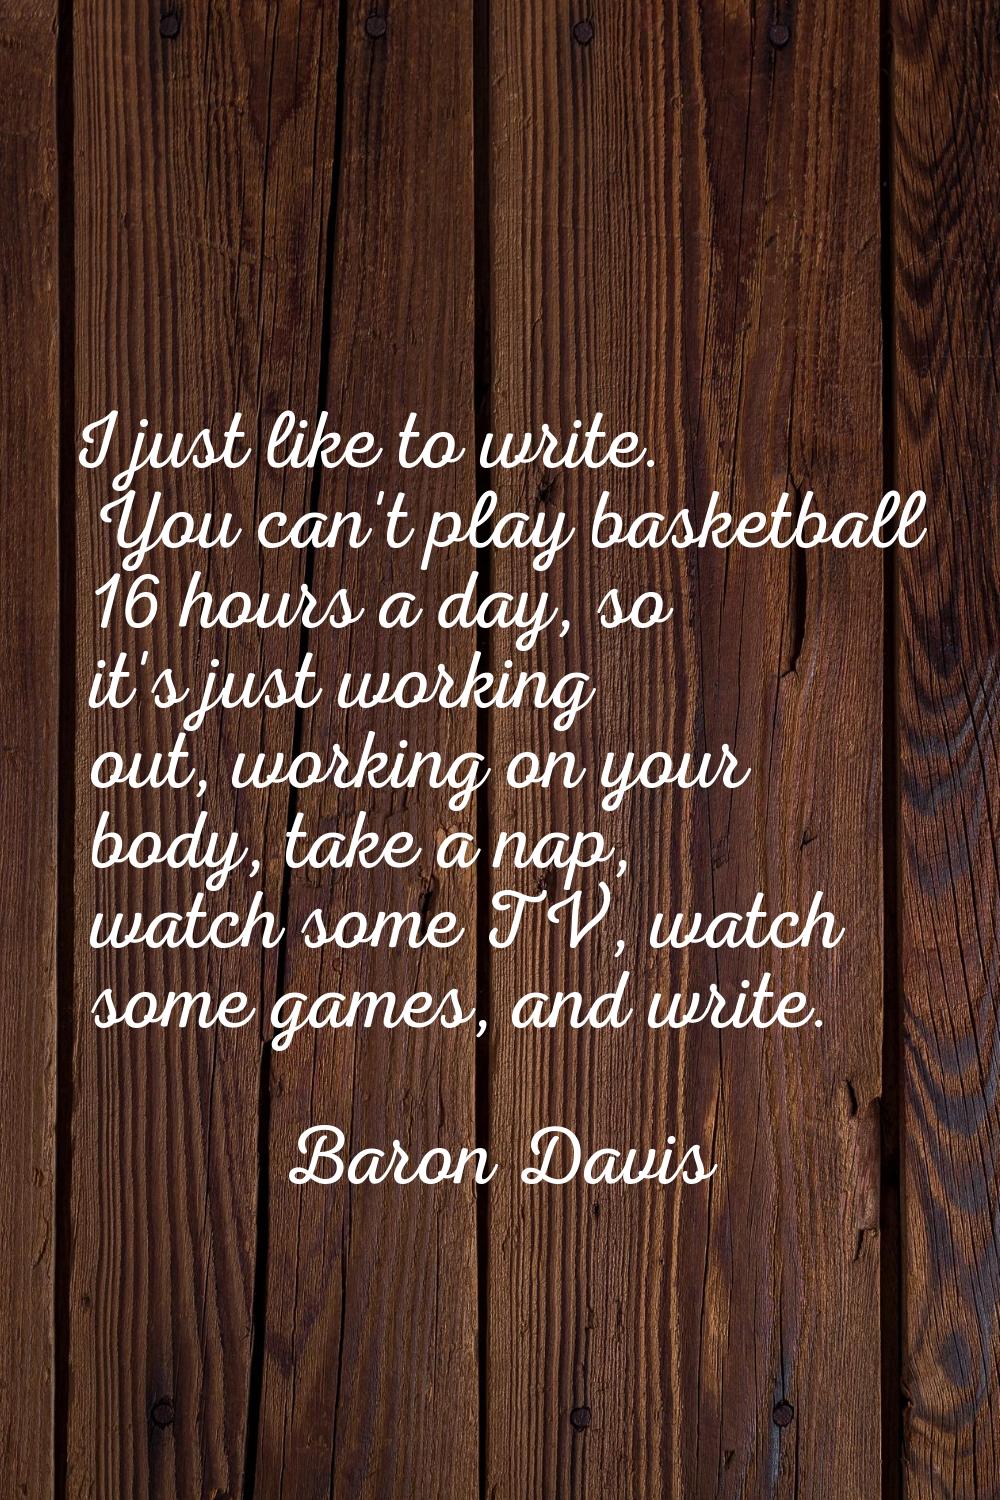 I just like to write. You can't play basketball 16 hours a day, so it's just working out, working o